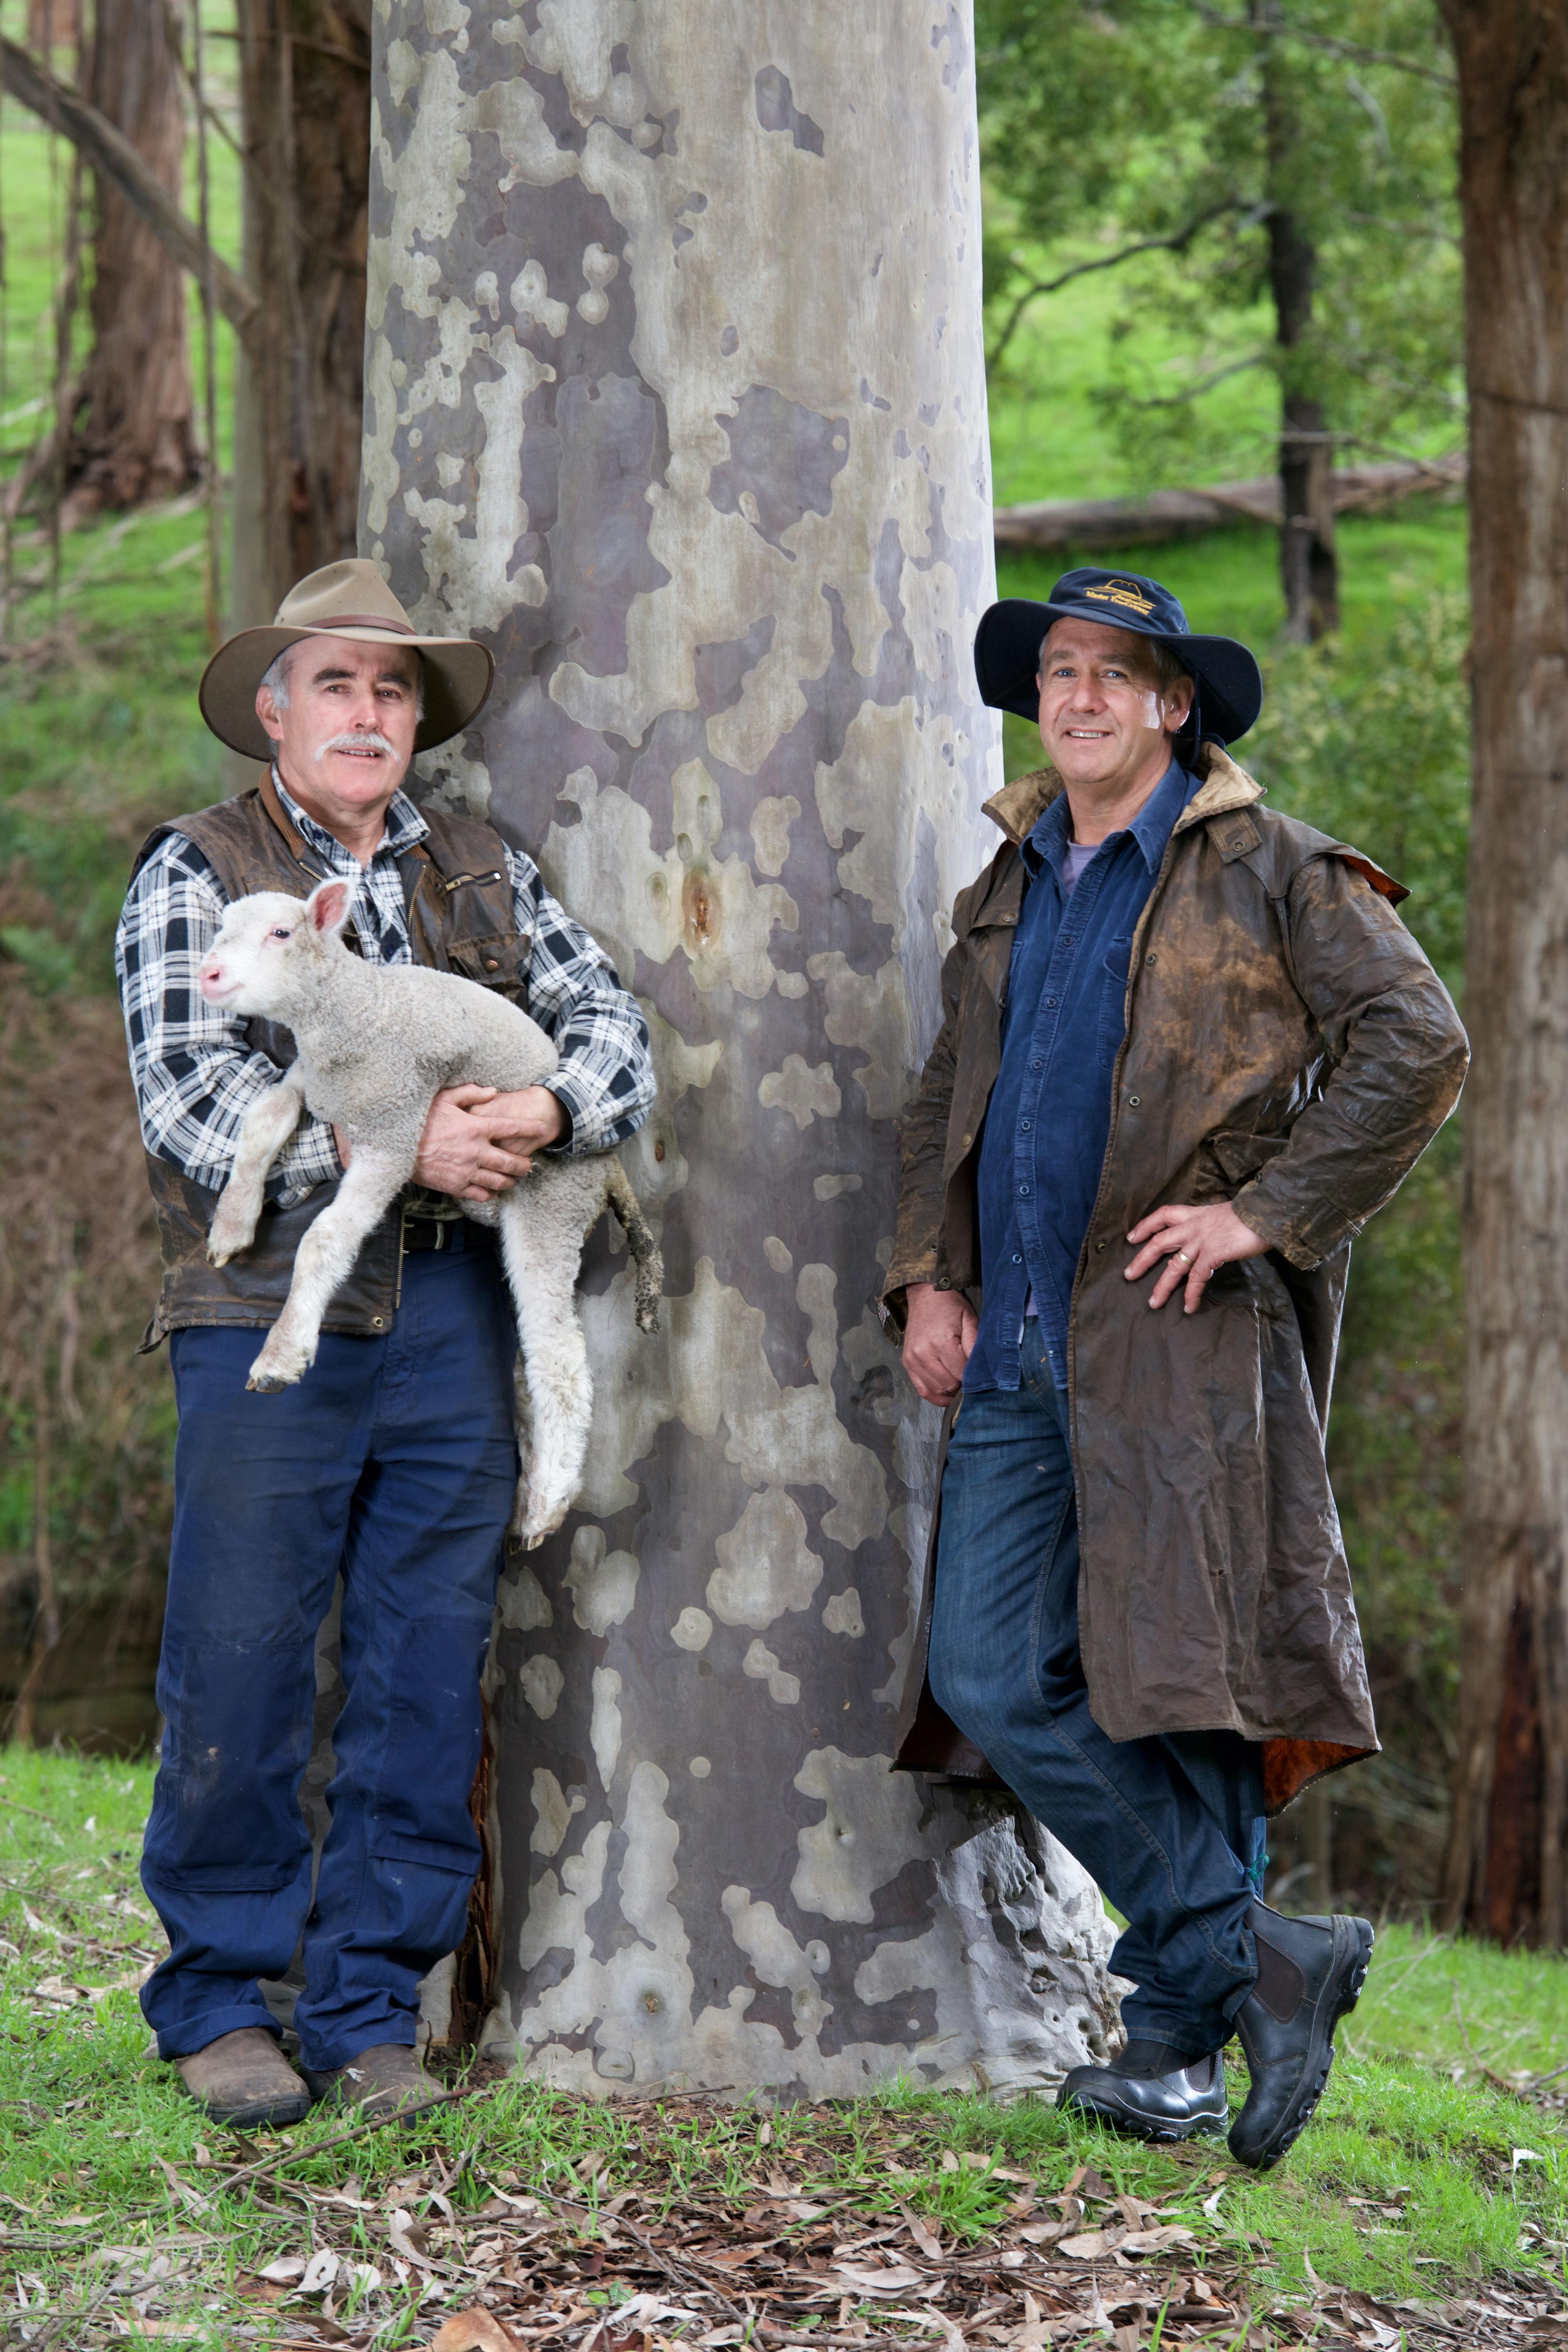 A farmer on the leftholding a lamb standing next to a eucalypt tree with another farmer on the right